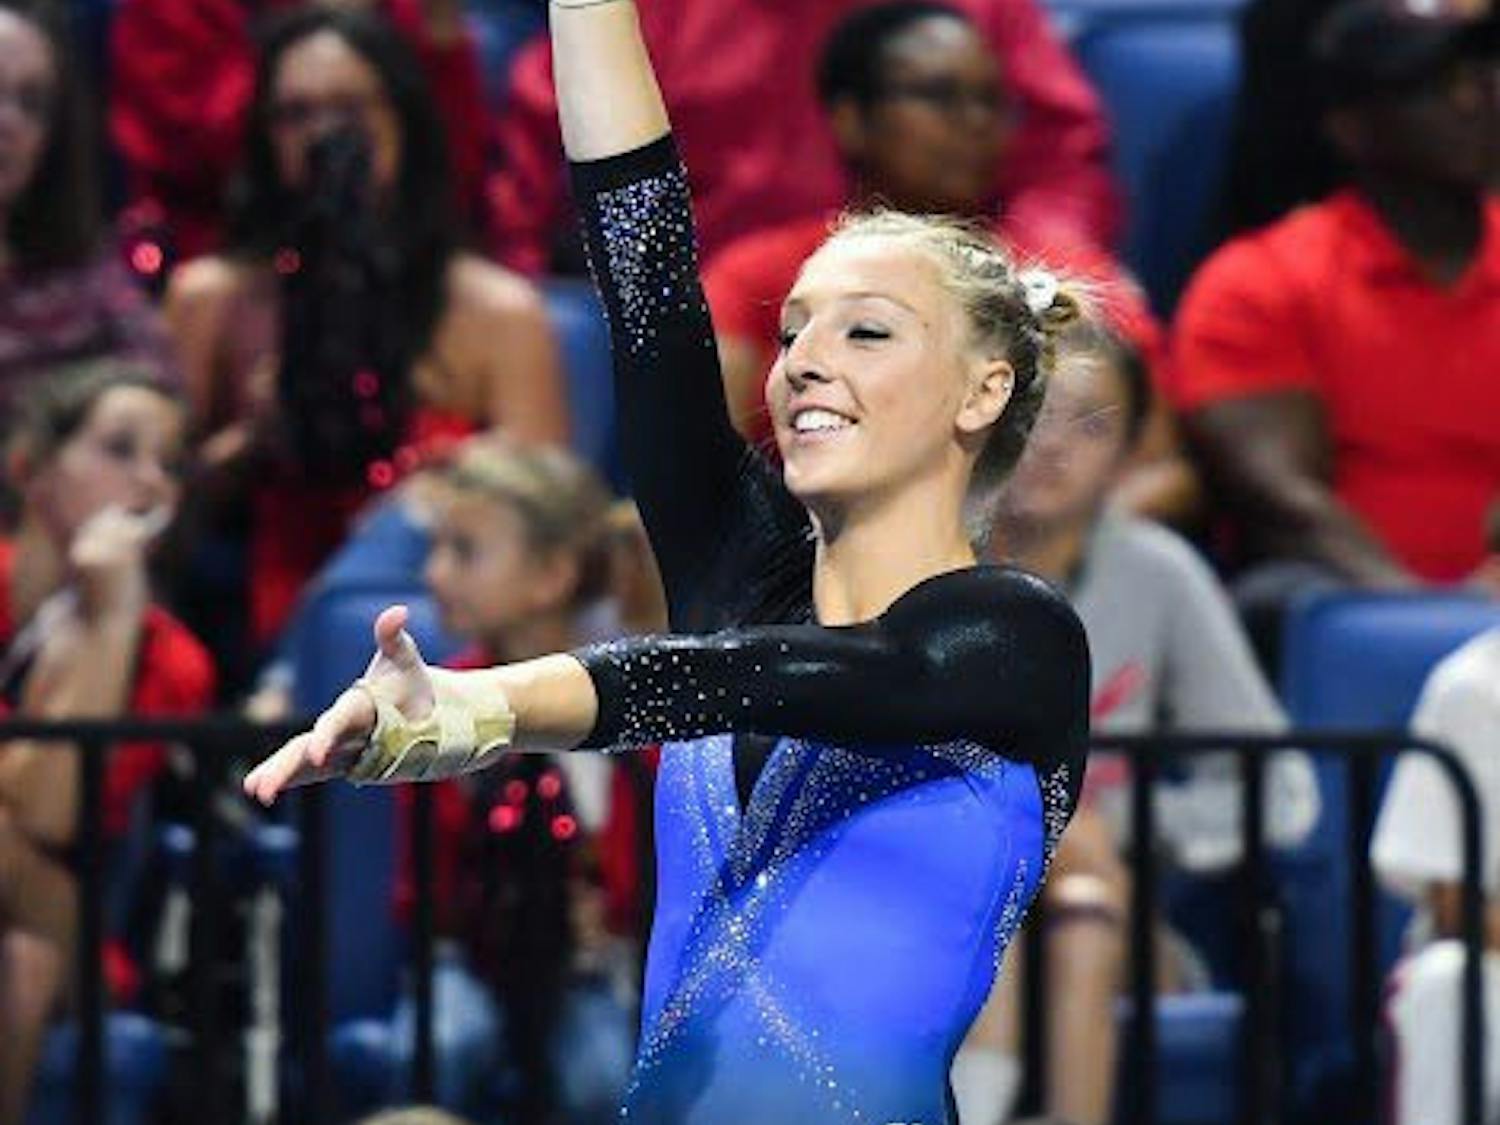 UF gymnast Alex McMurtry performs a routine during the NCAA Gainesville Regional on April 1, 2017, in the O'Connell Center.